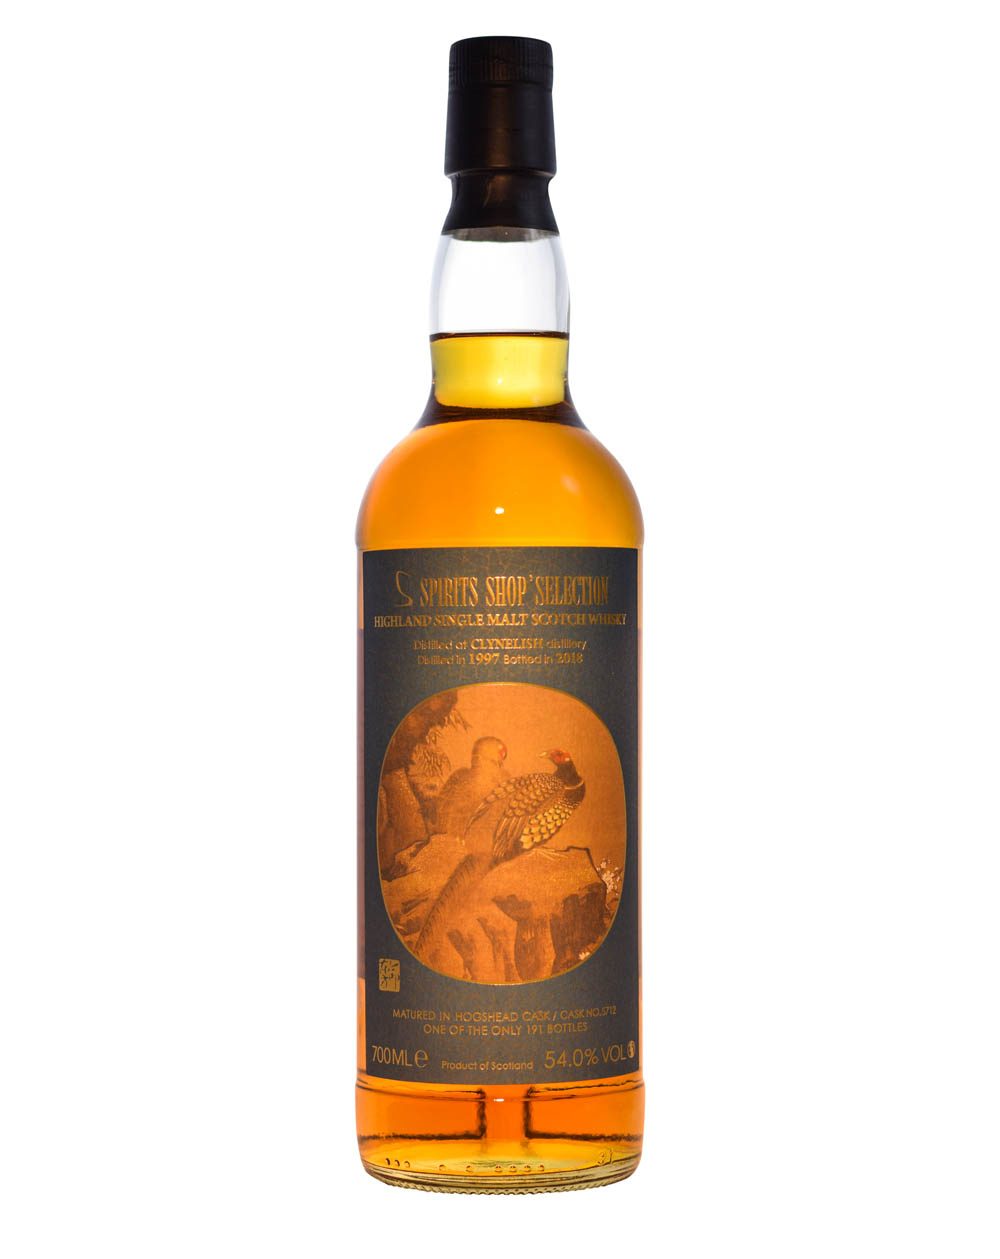 Clynelish 1997 The Spirit Shop Selection (21 Years Old) Musthave Malts MHM